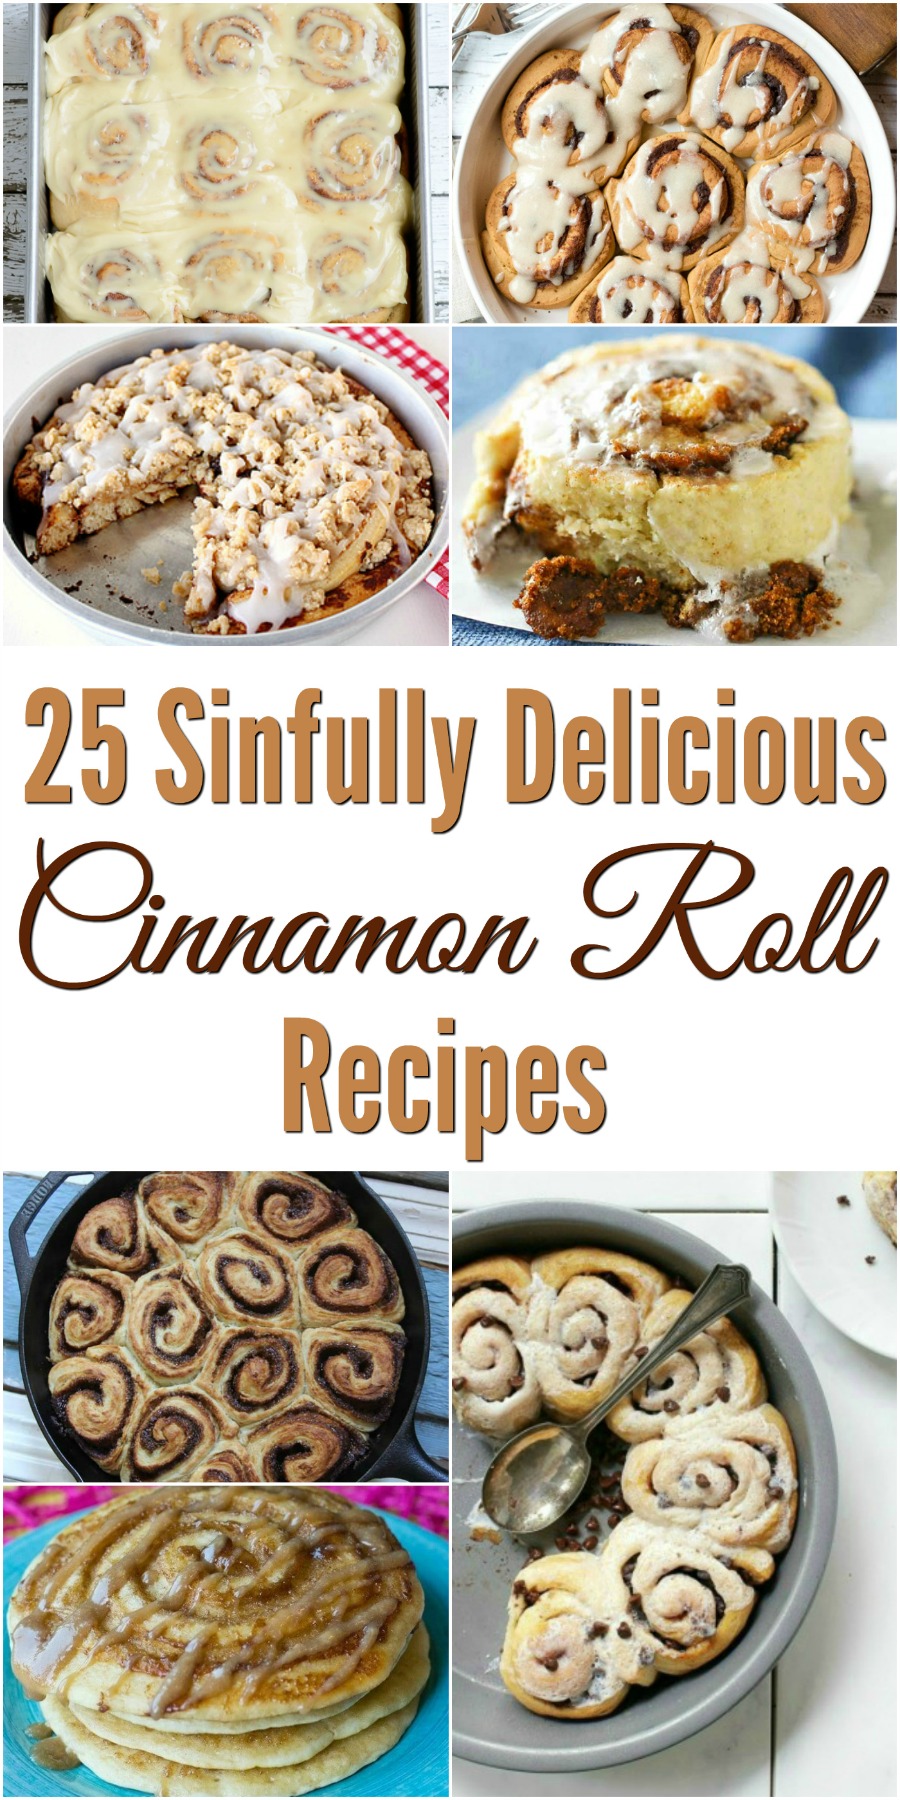 Want to make a delicious homemade breakfast for your family? Check out these 25 Delicious Cinnamon Roll Recipes here! 